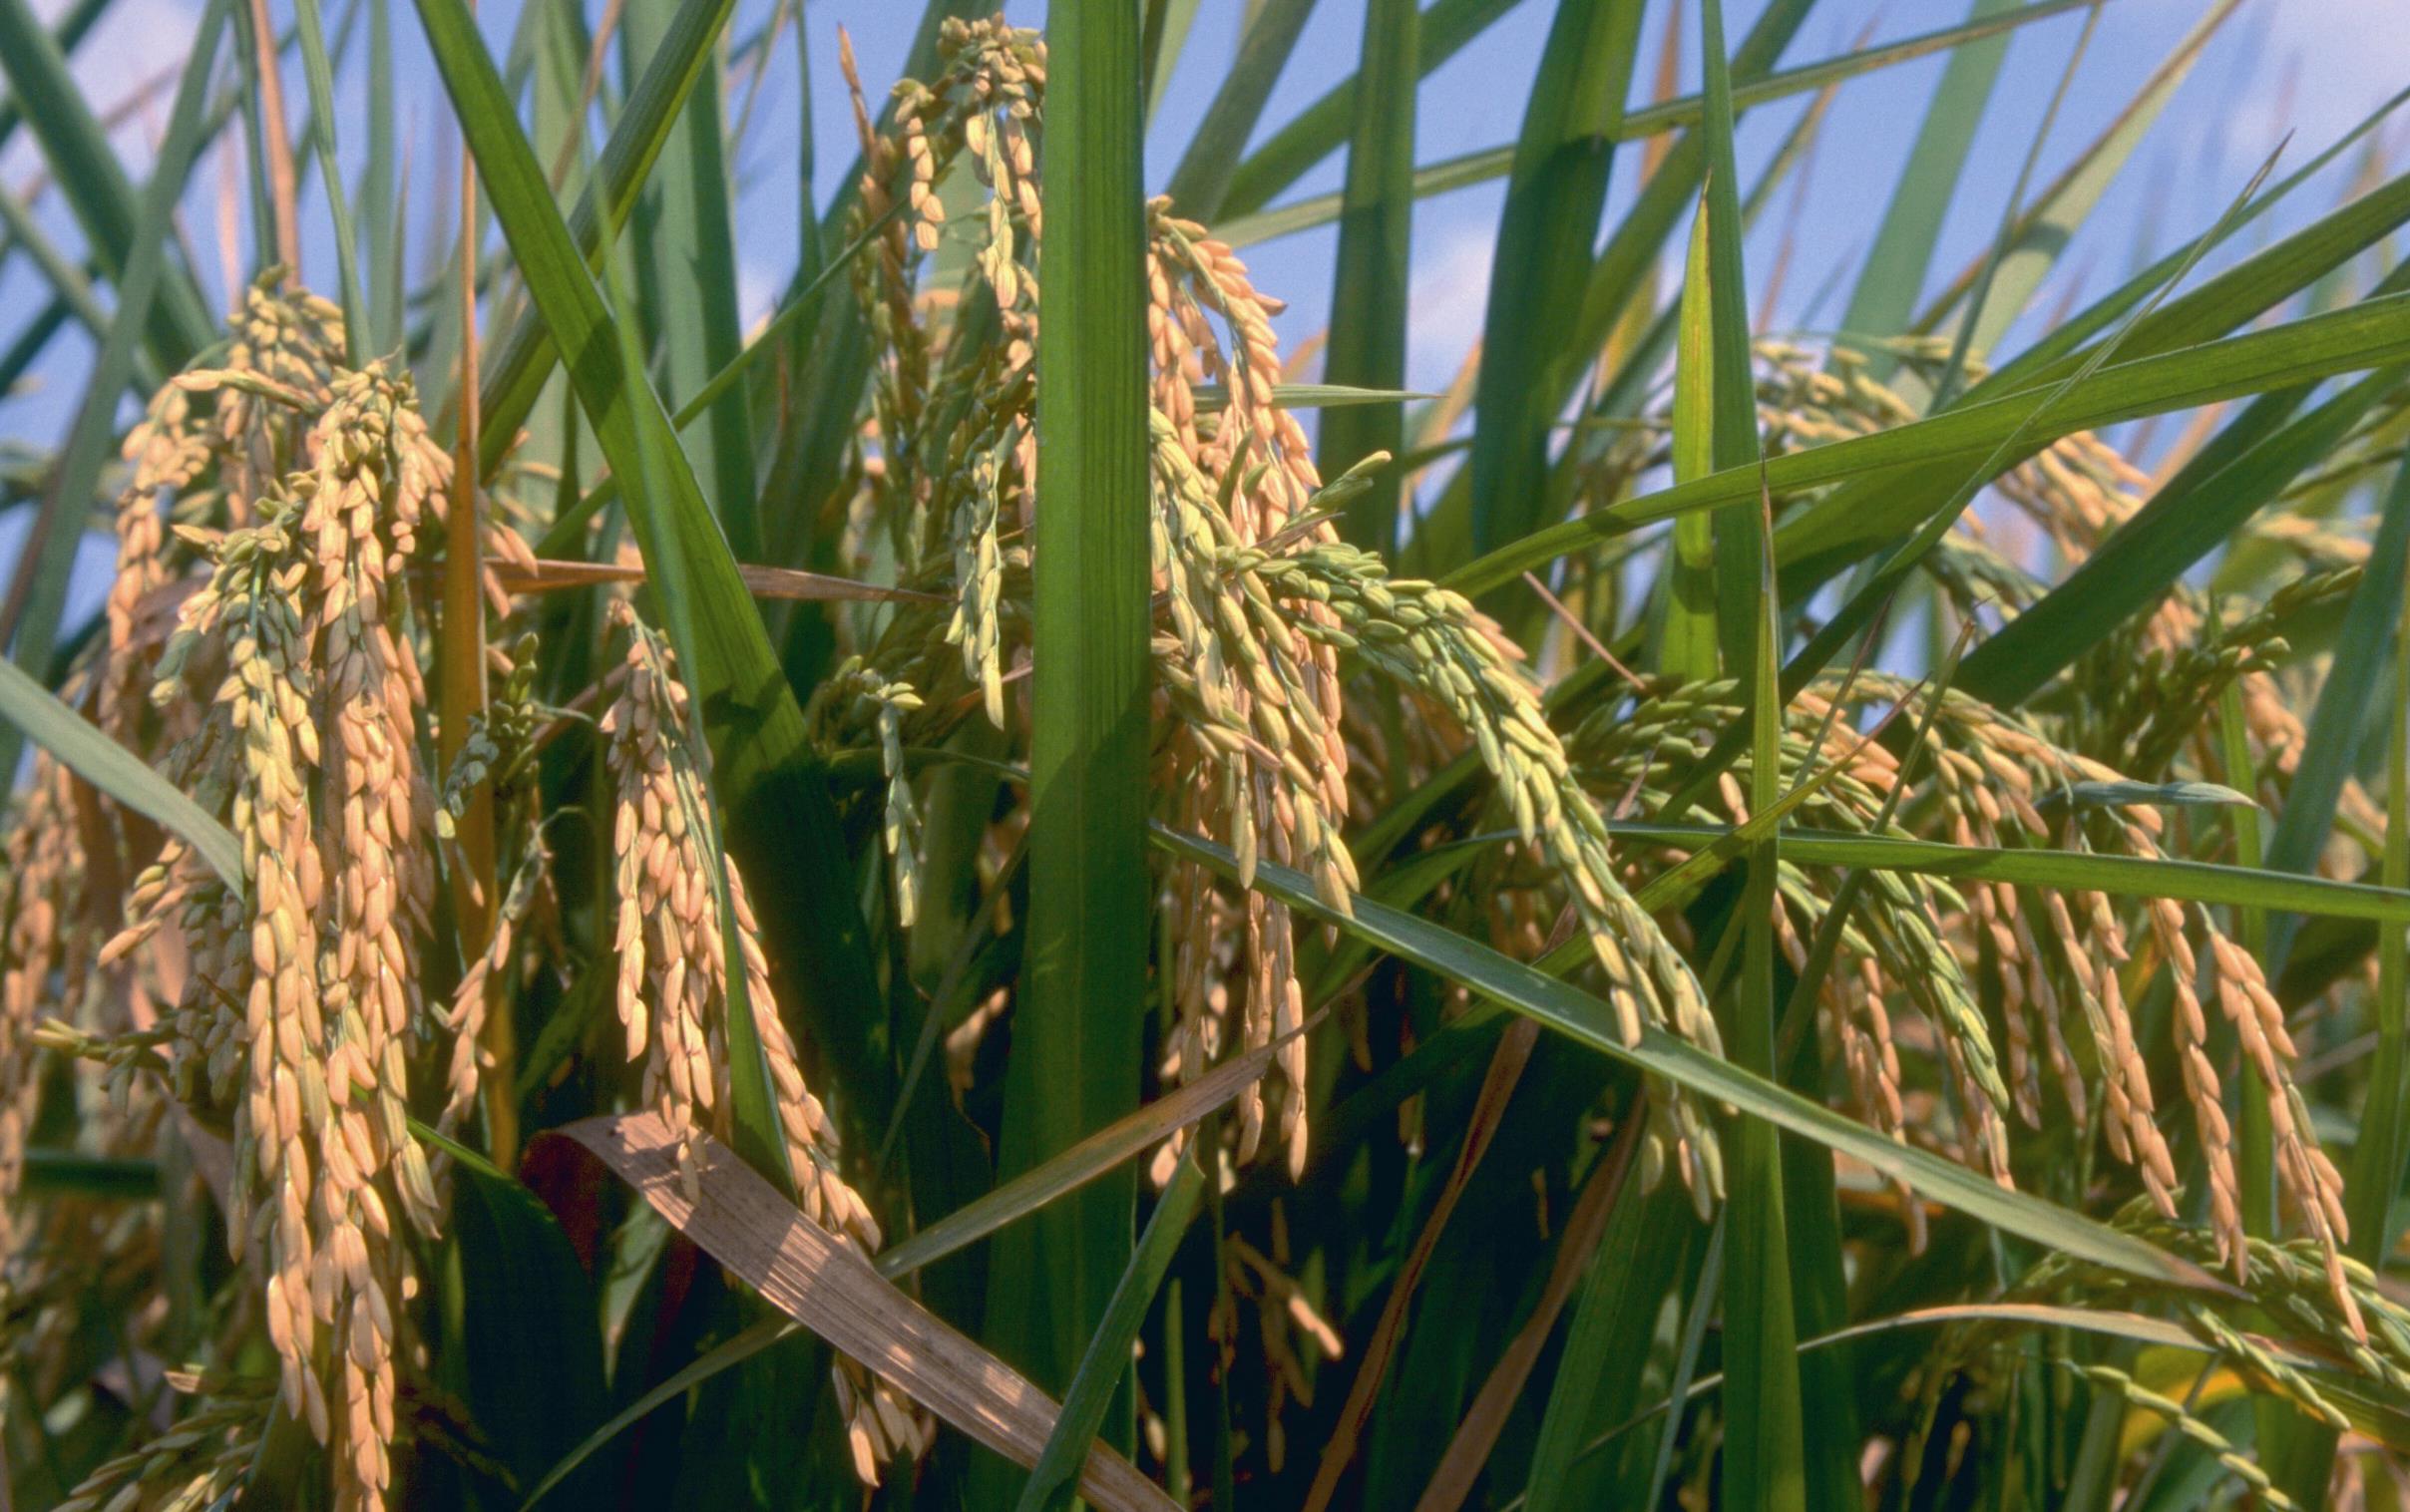 Closeup of maturing rice plant with golden and green rice heads, blue sky background